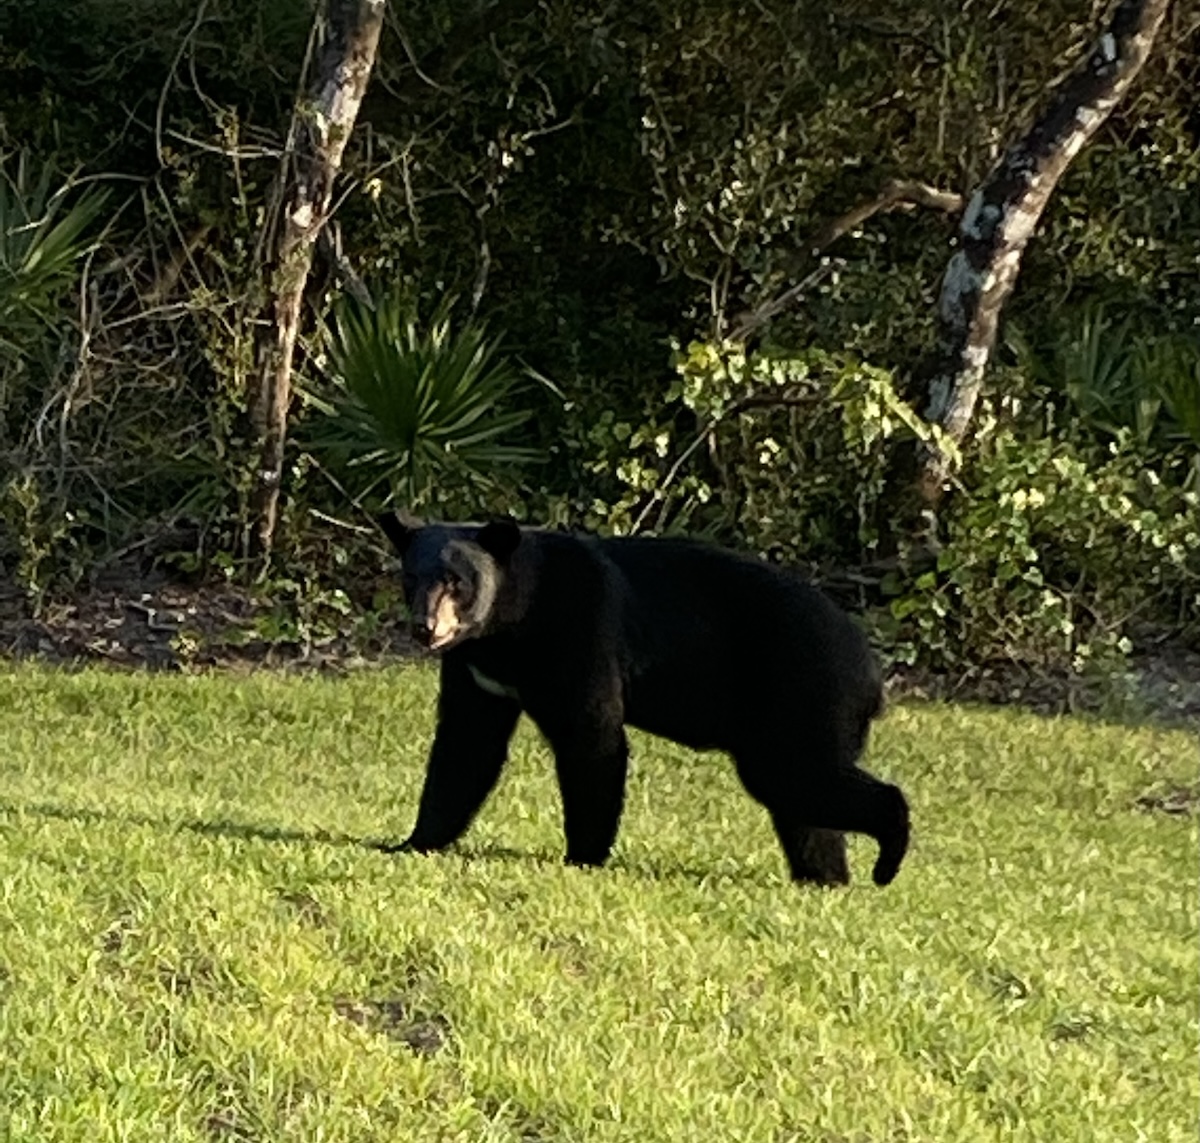 Black bear out for a stroll in Ocala